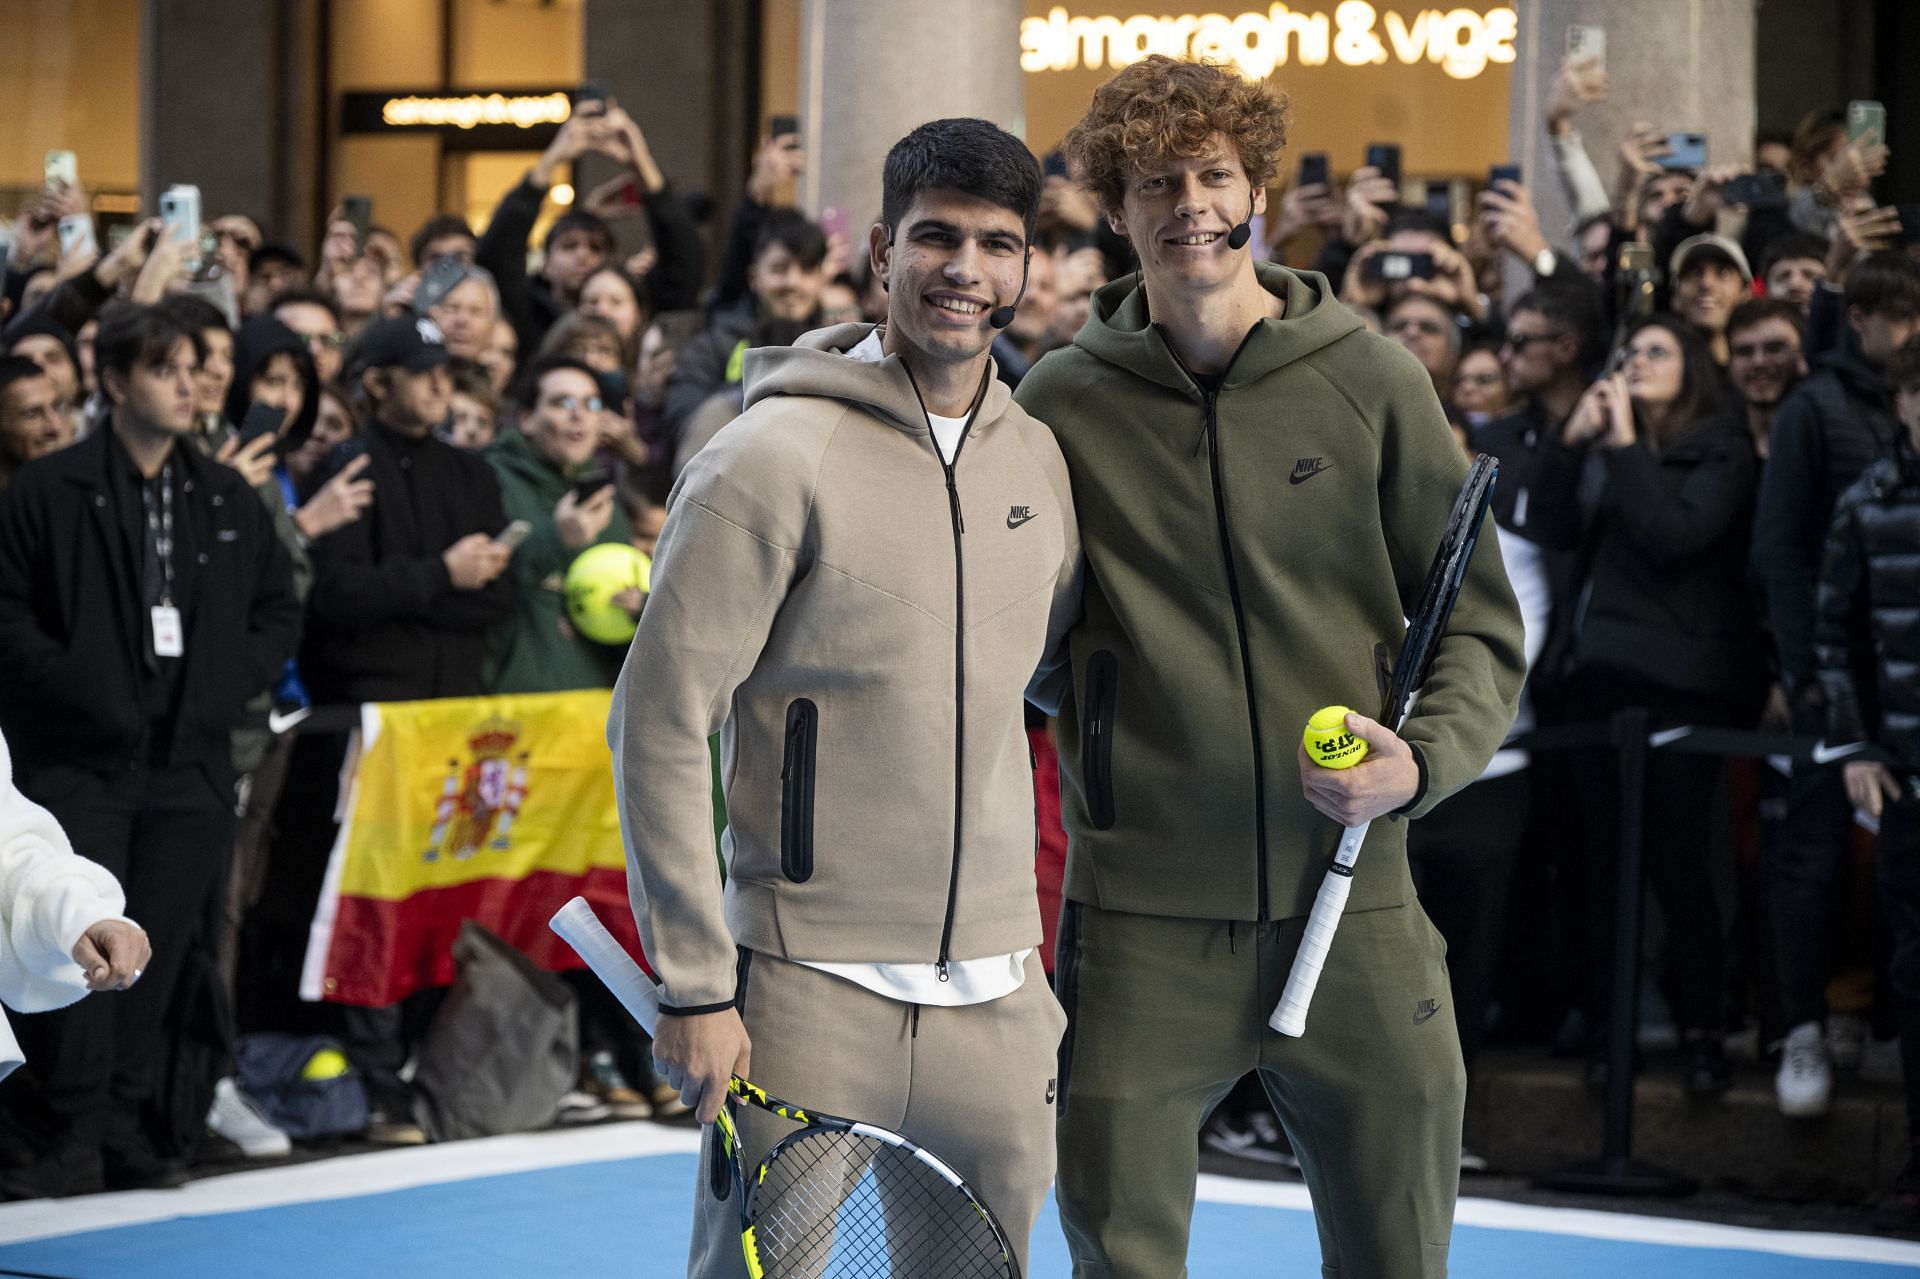 Alcaraz and Sinner at the Turin Nitto ATP Finals